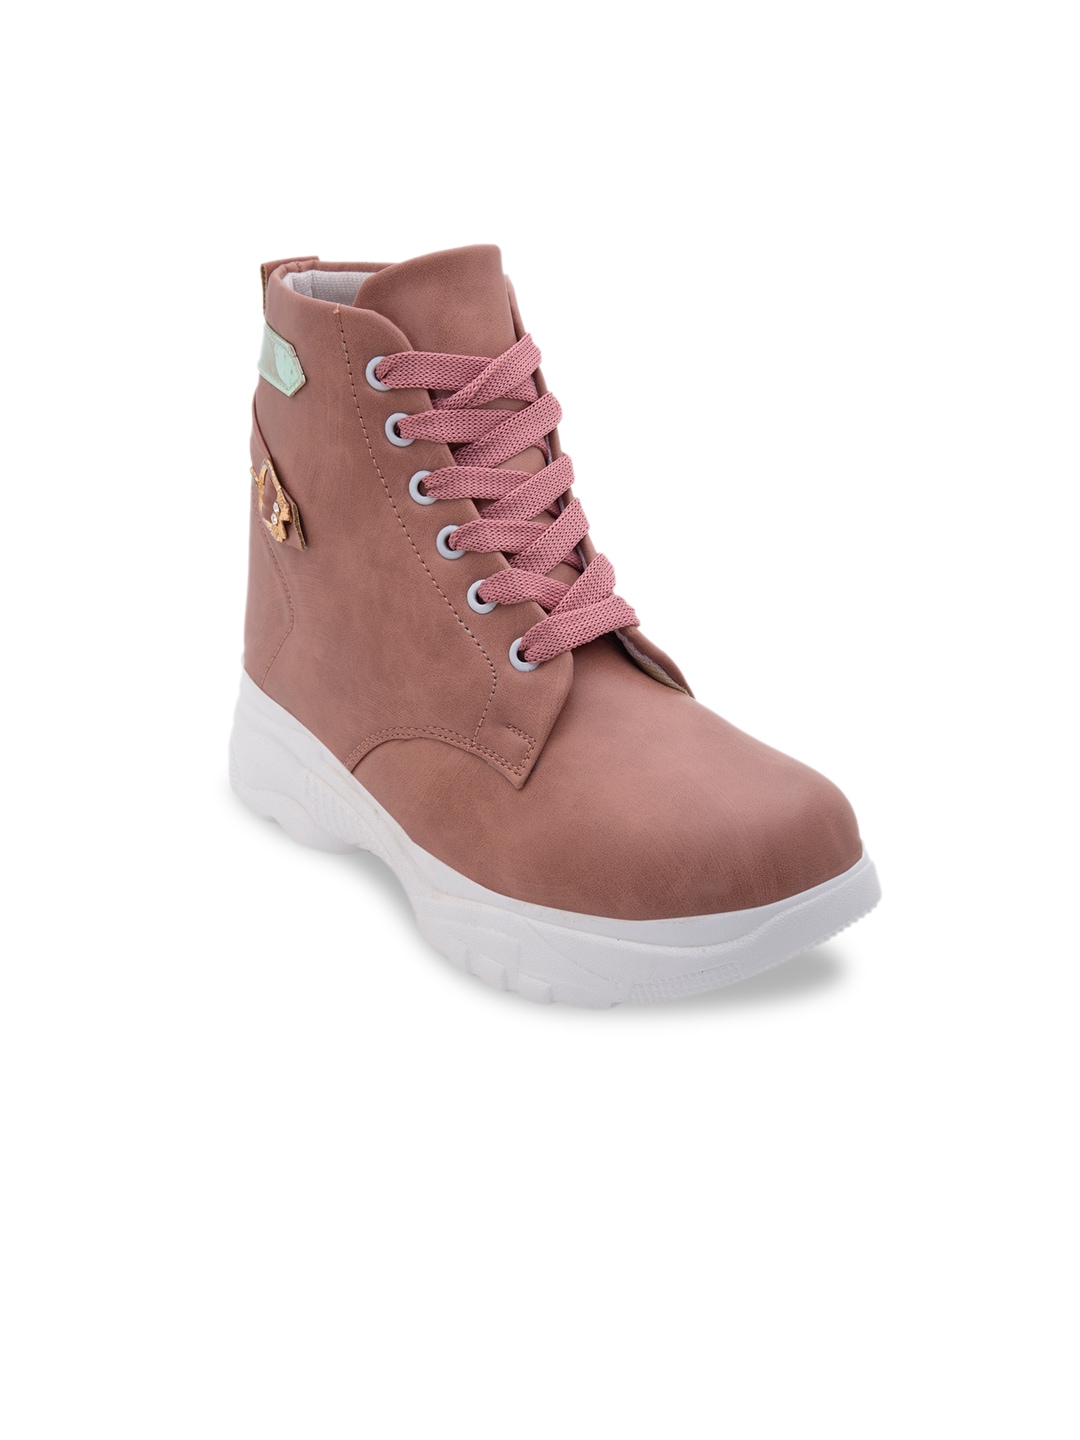 DEAS Pink Wedge Heeled Boots Price in India